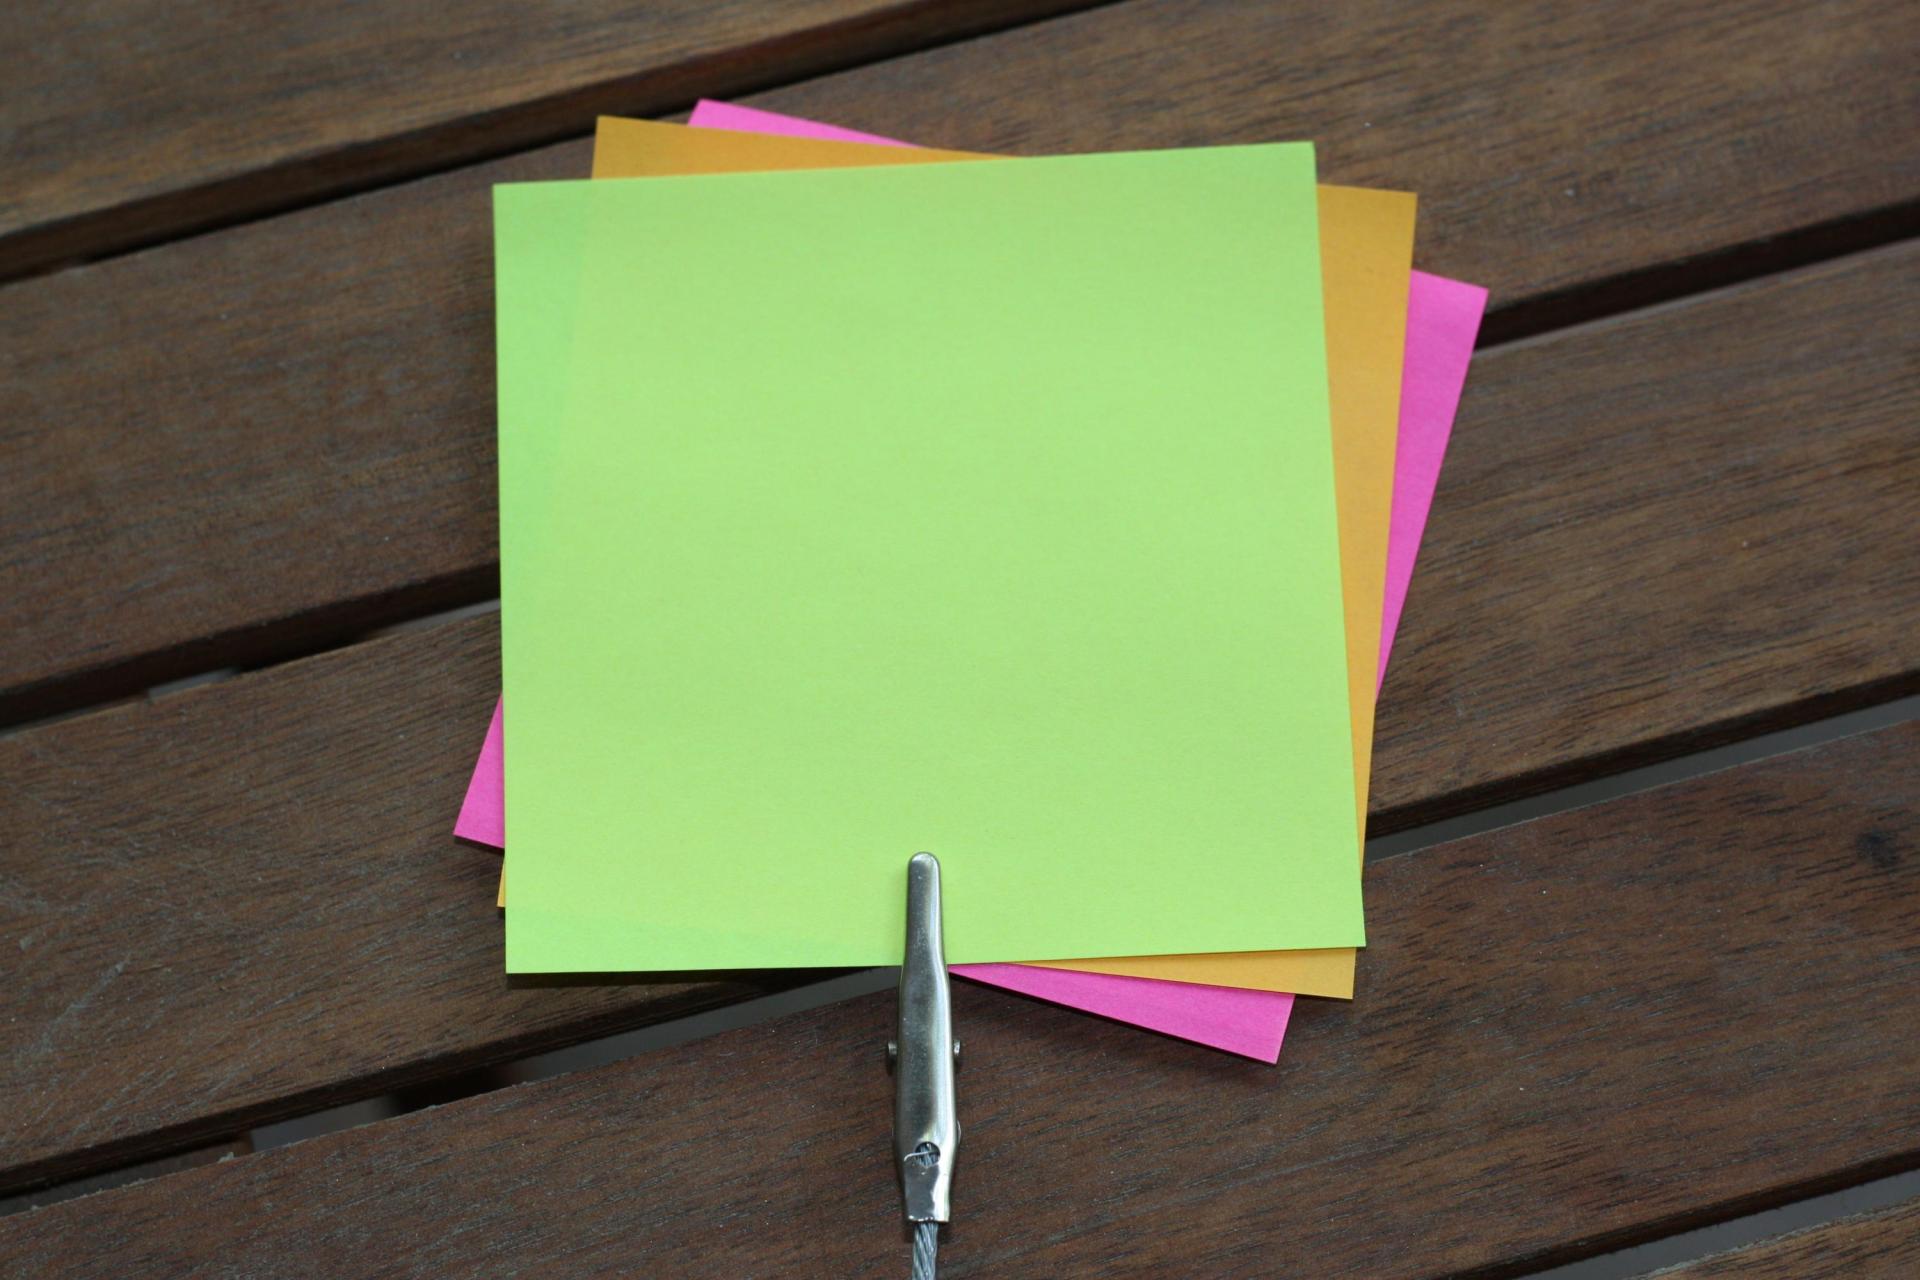 Several coloured post-it notes attached to a clip